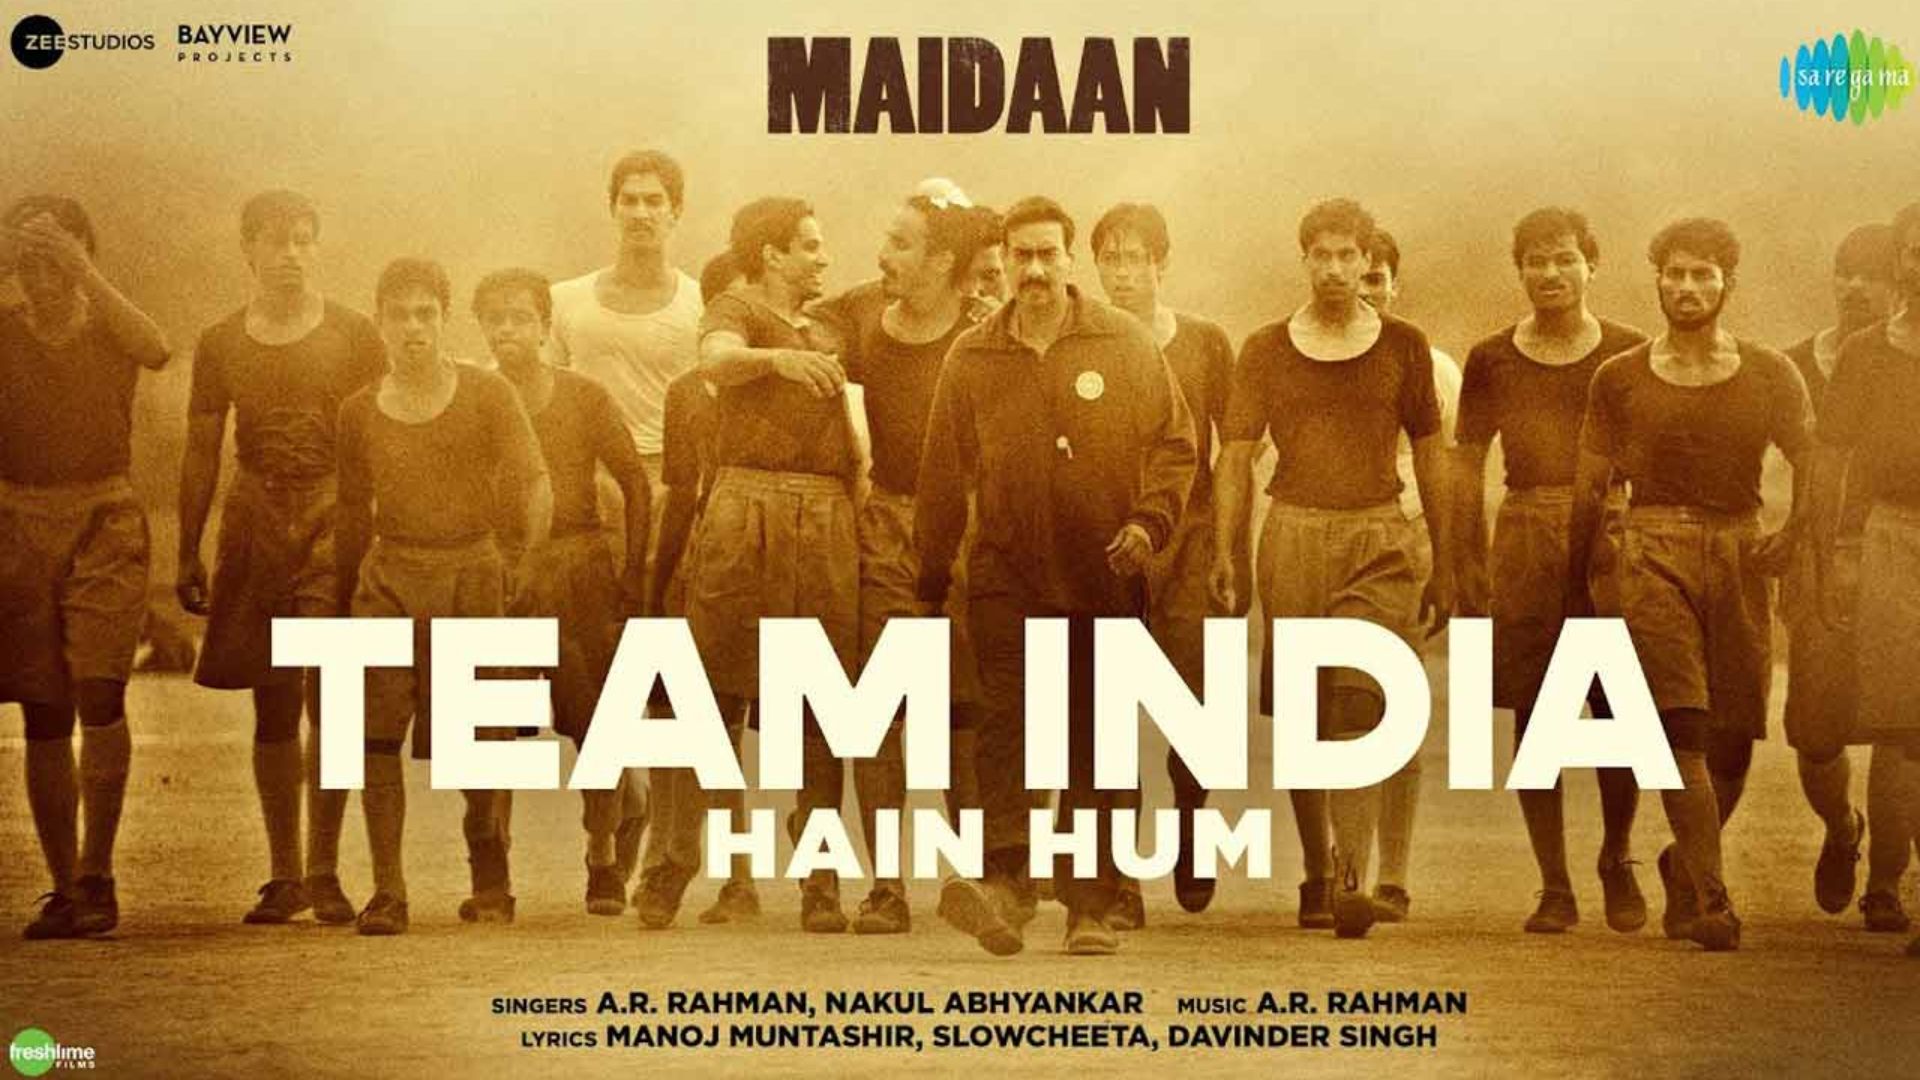 AR Rahman’s motivational song ‘Team India’ from ‘Maidaan’ out now